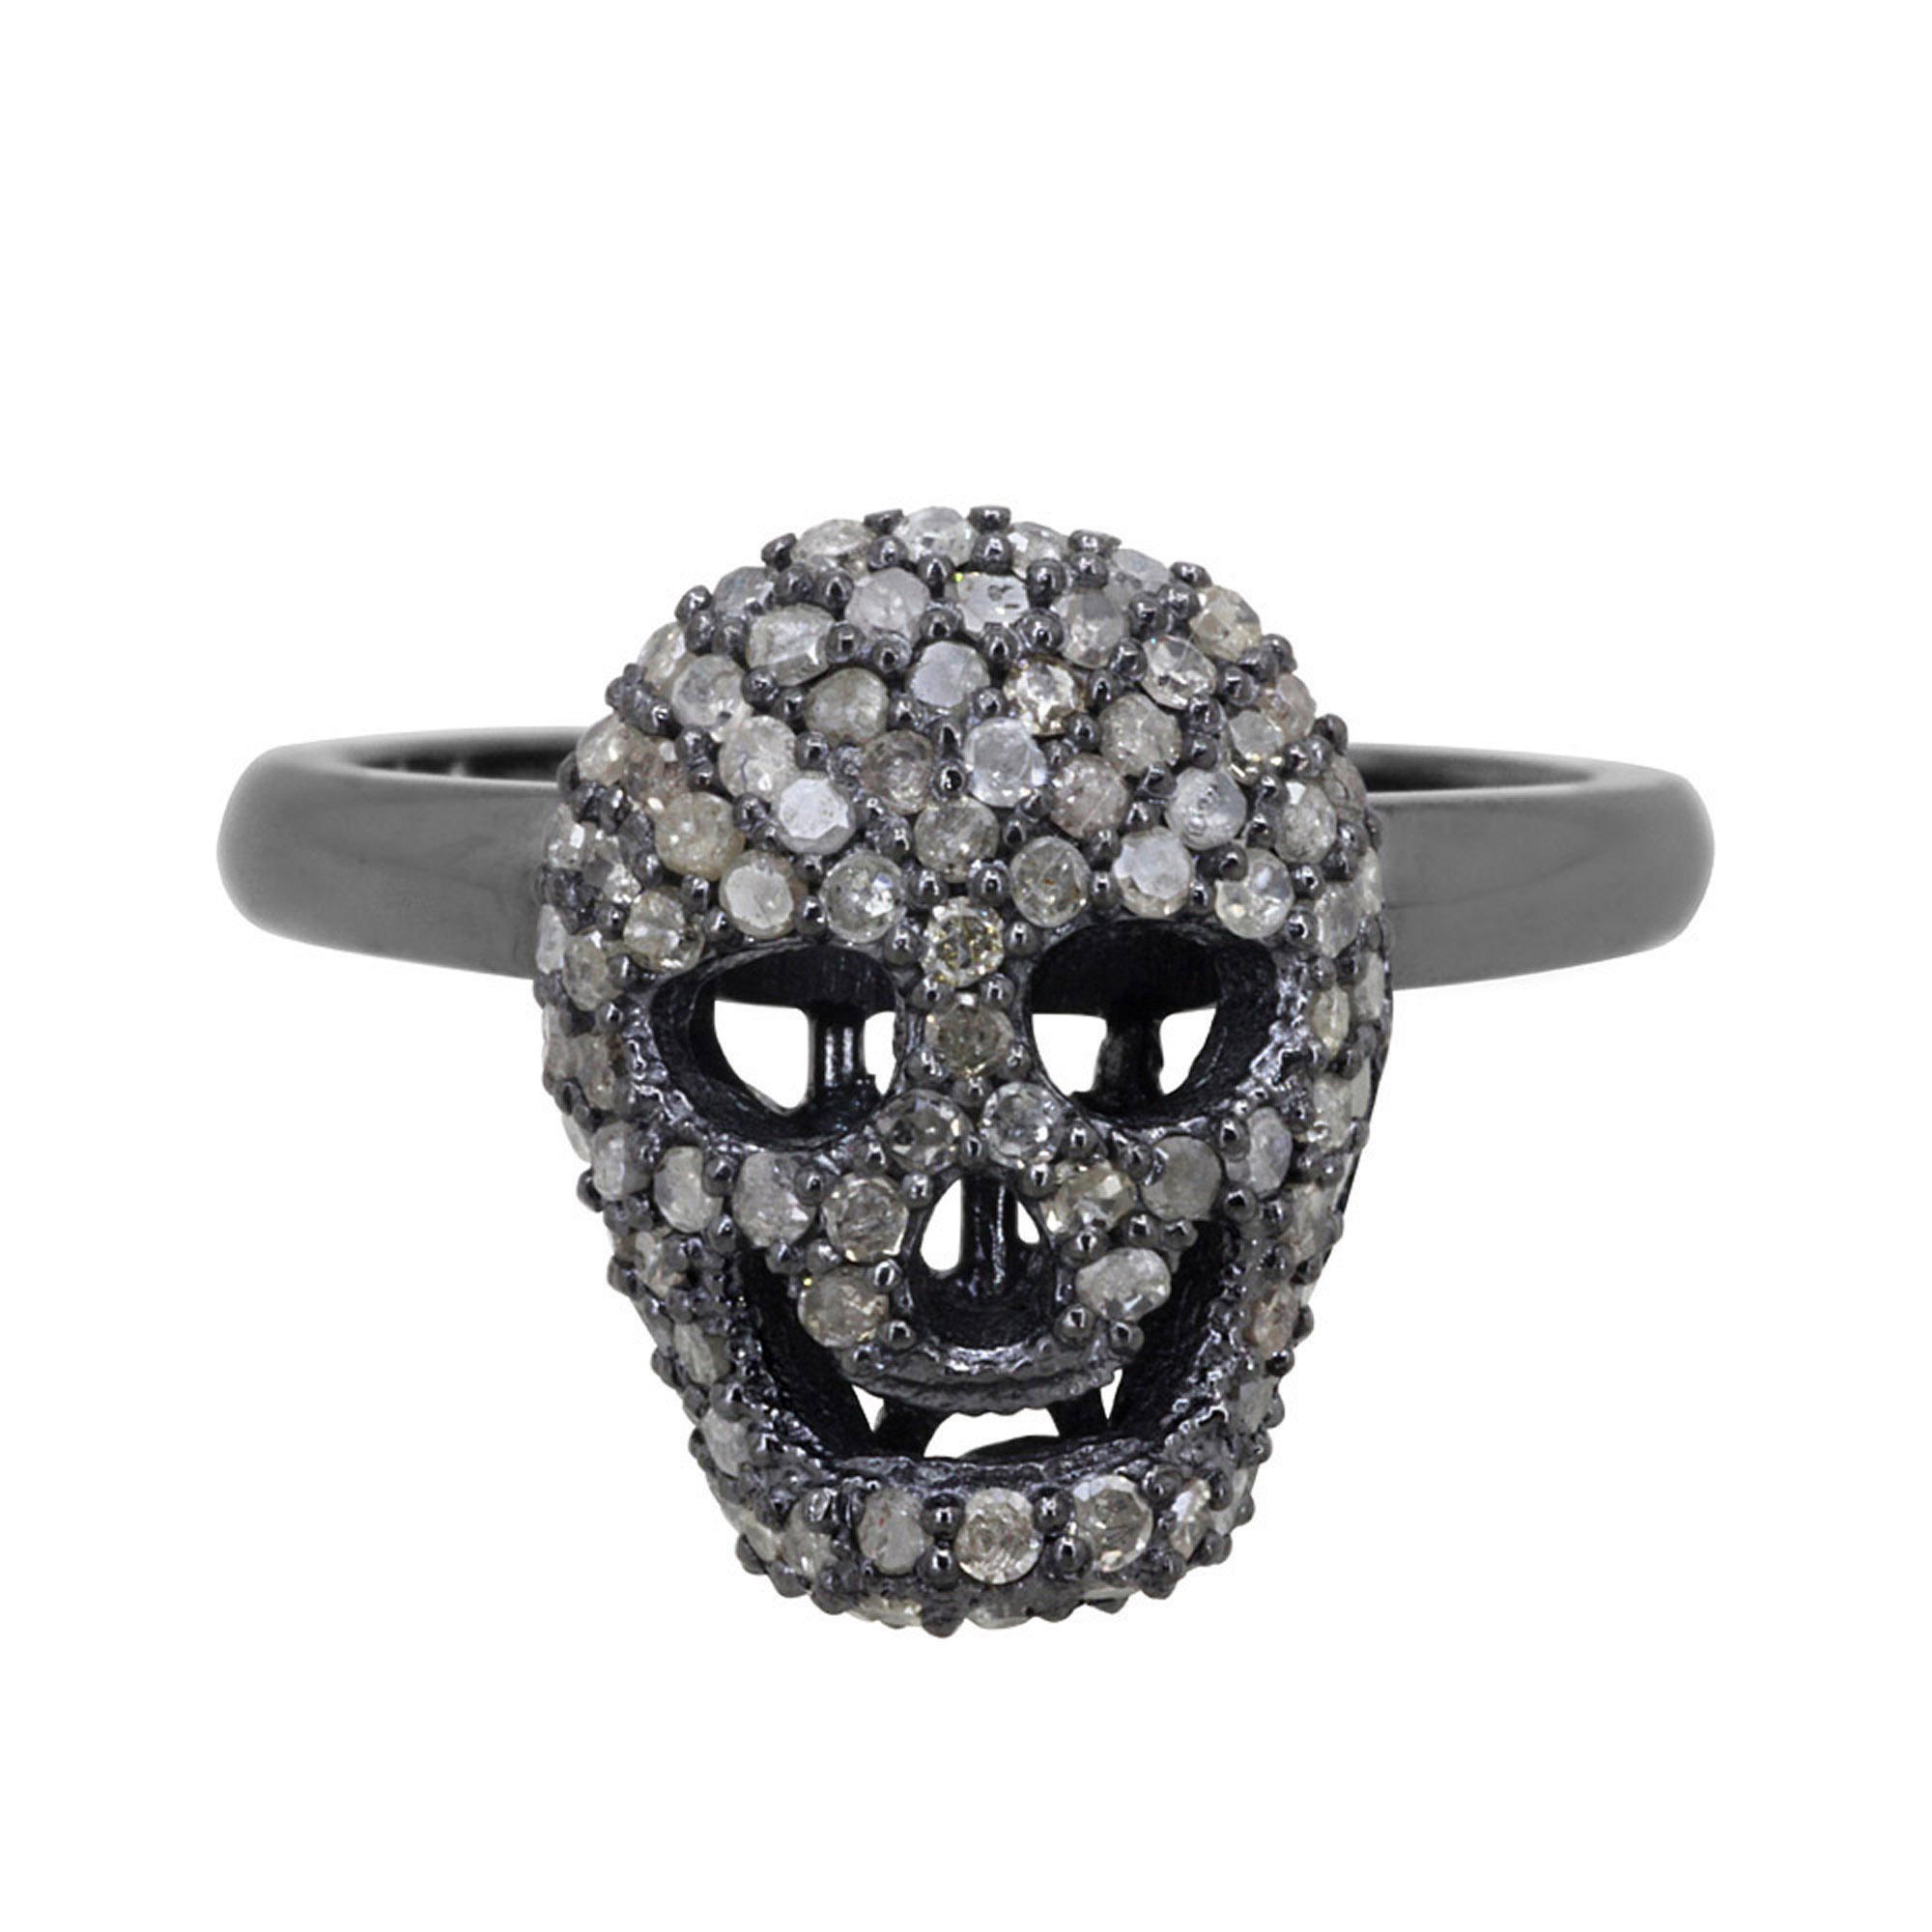 Pure silver skull shape ring with pave diamond jewelry